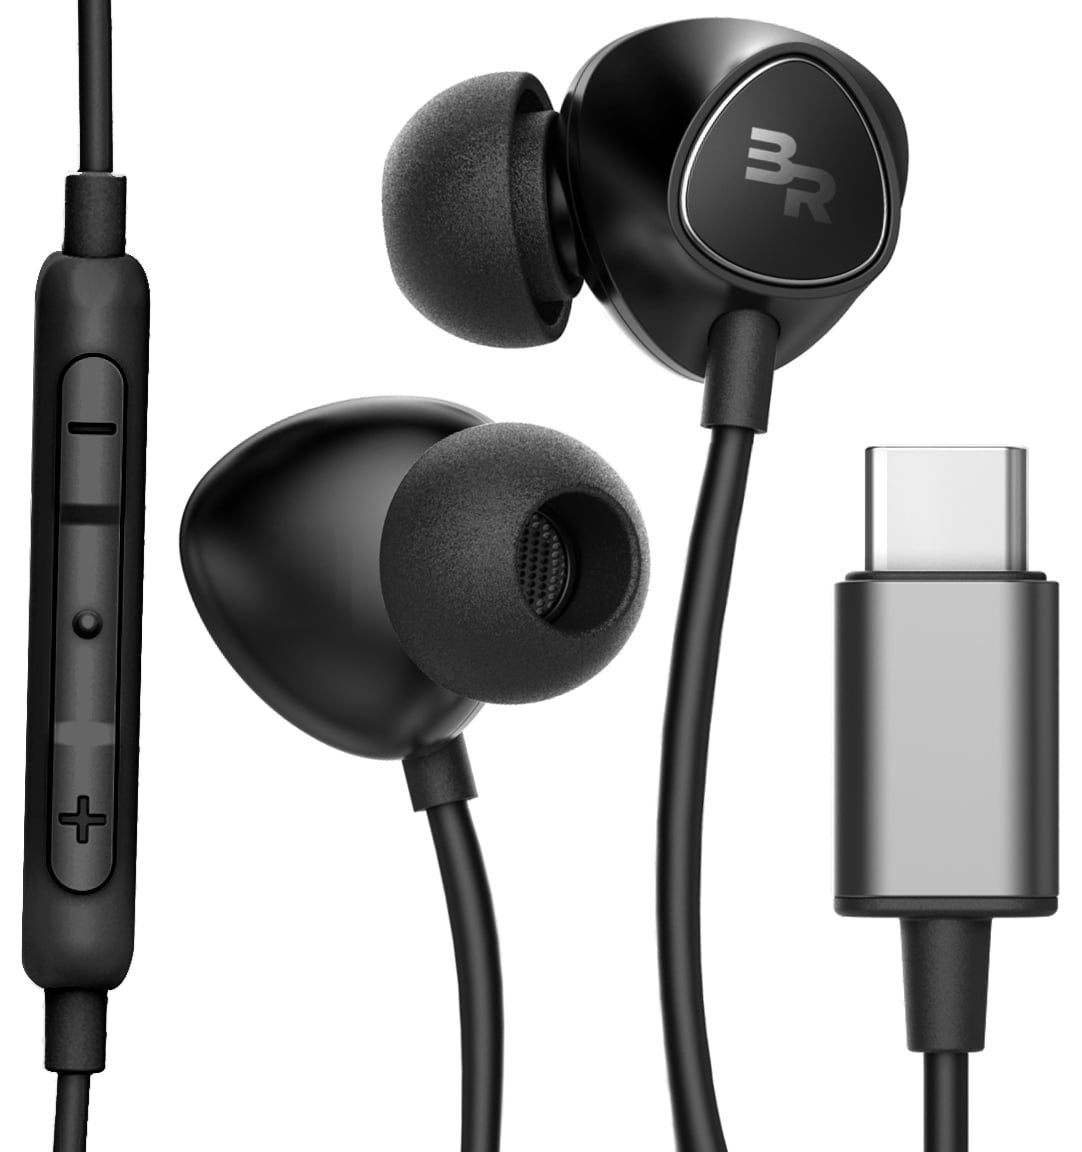 Thore Type C Headphones - In Ear Wired USB C Earphones with Microphone & Volume Control for Note 10/20 S21 Ultra, Pixel 6/5/4, Huawei Mate 10/Pro, Moto LG Android and More (